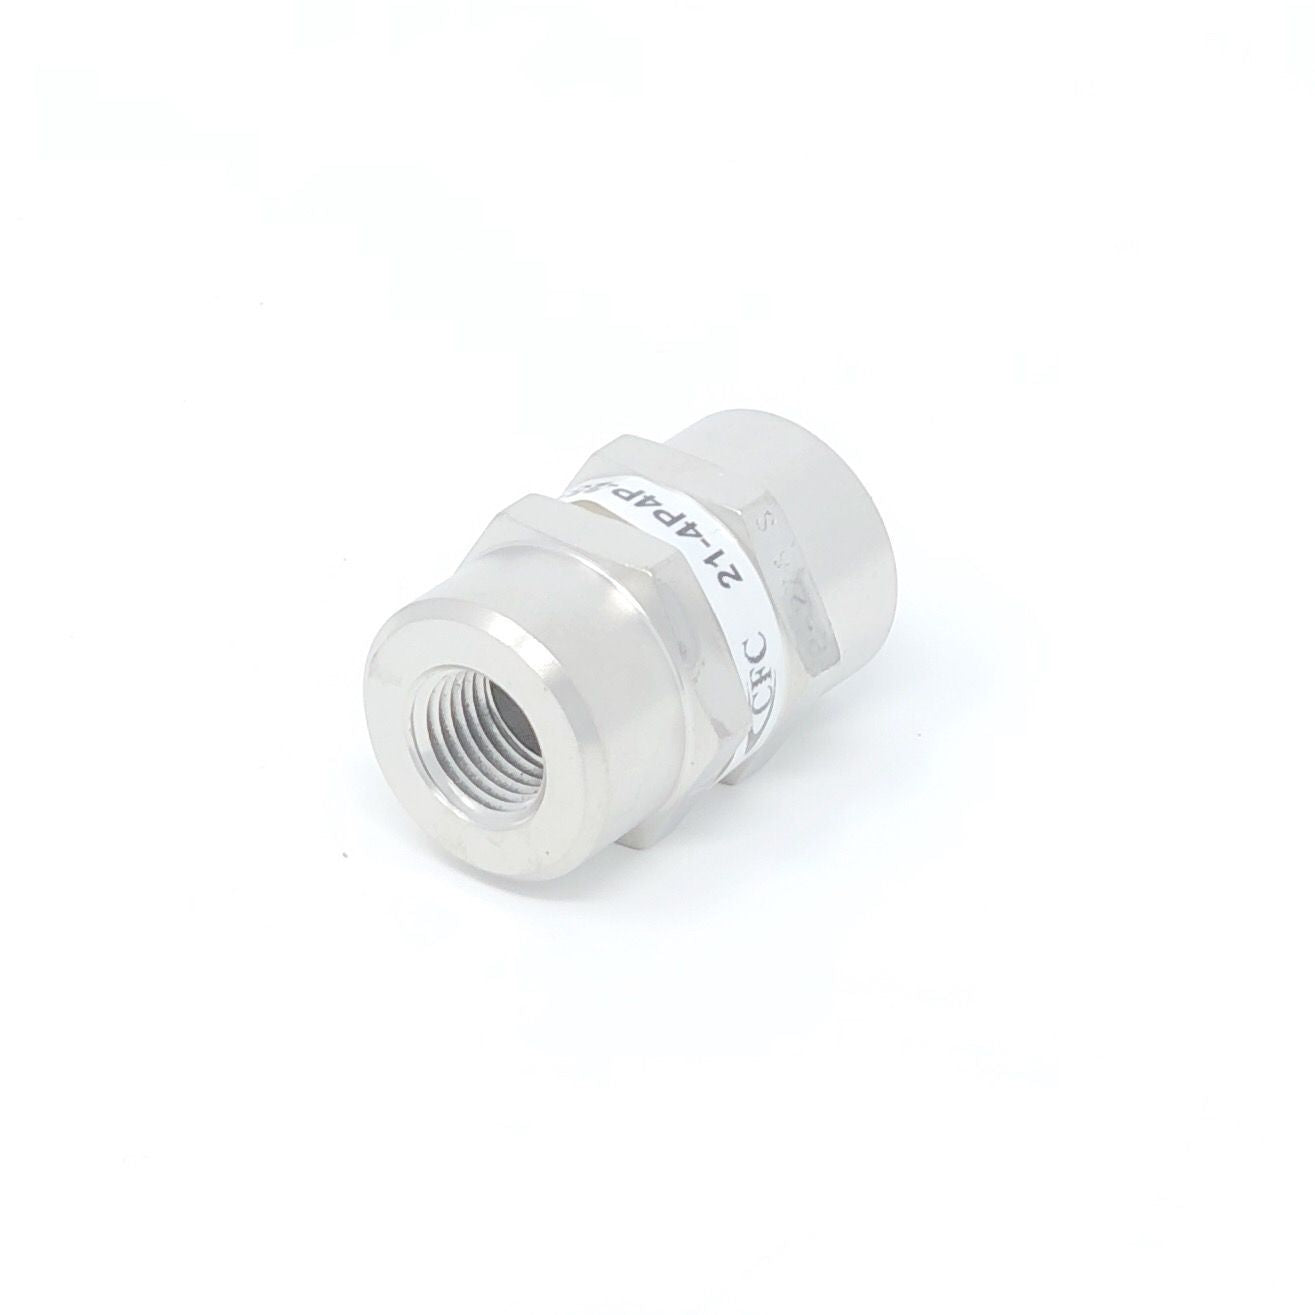 21-12M12M-100S : Chase High Pressure Inline Filter, 3000psi, #12 SAE (3/4"), 100 Micron, No Visual Indicator, With Bypass